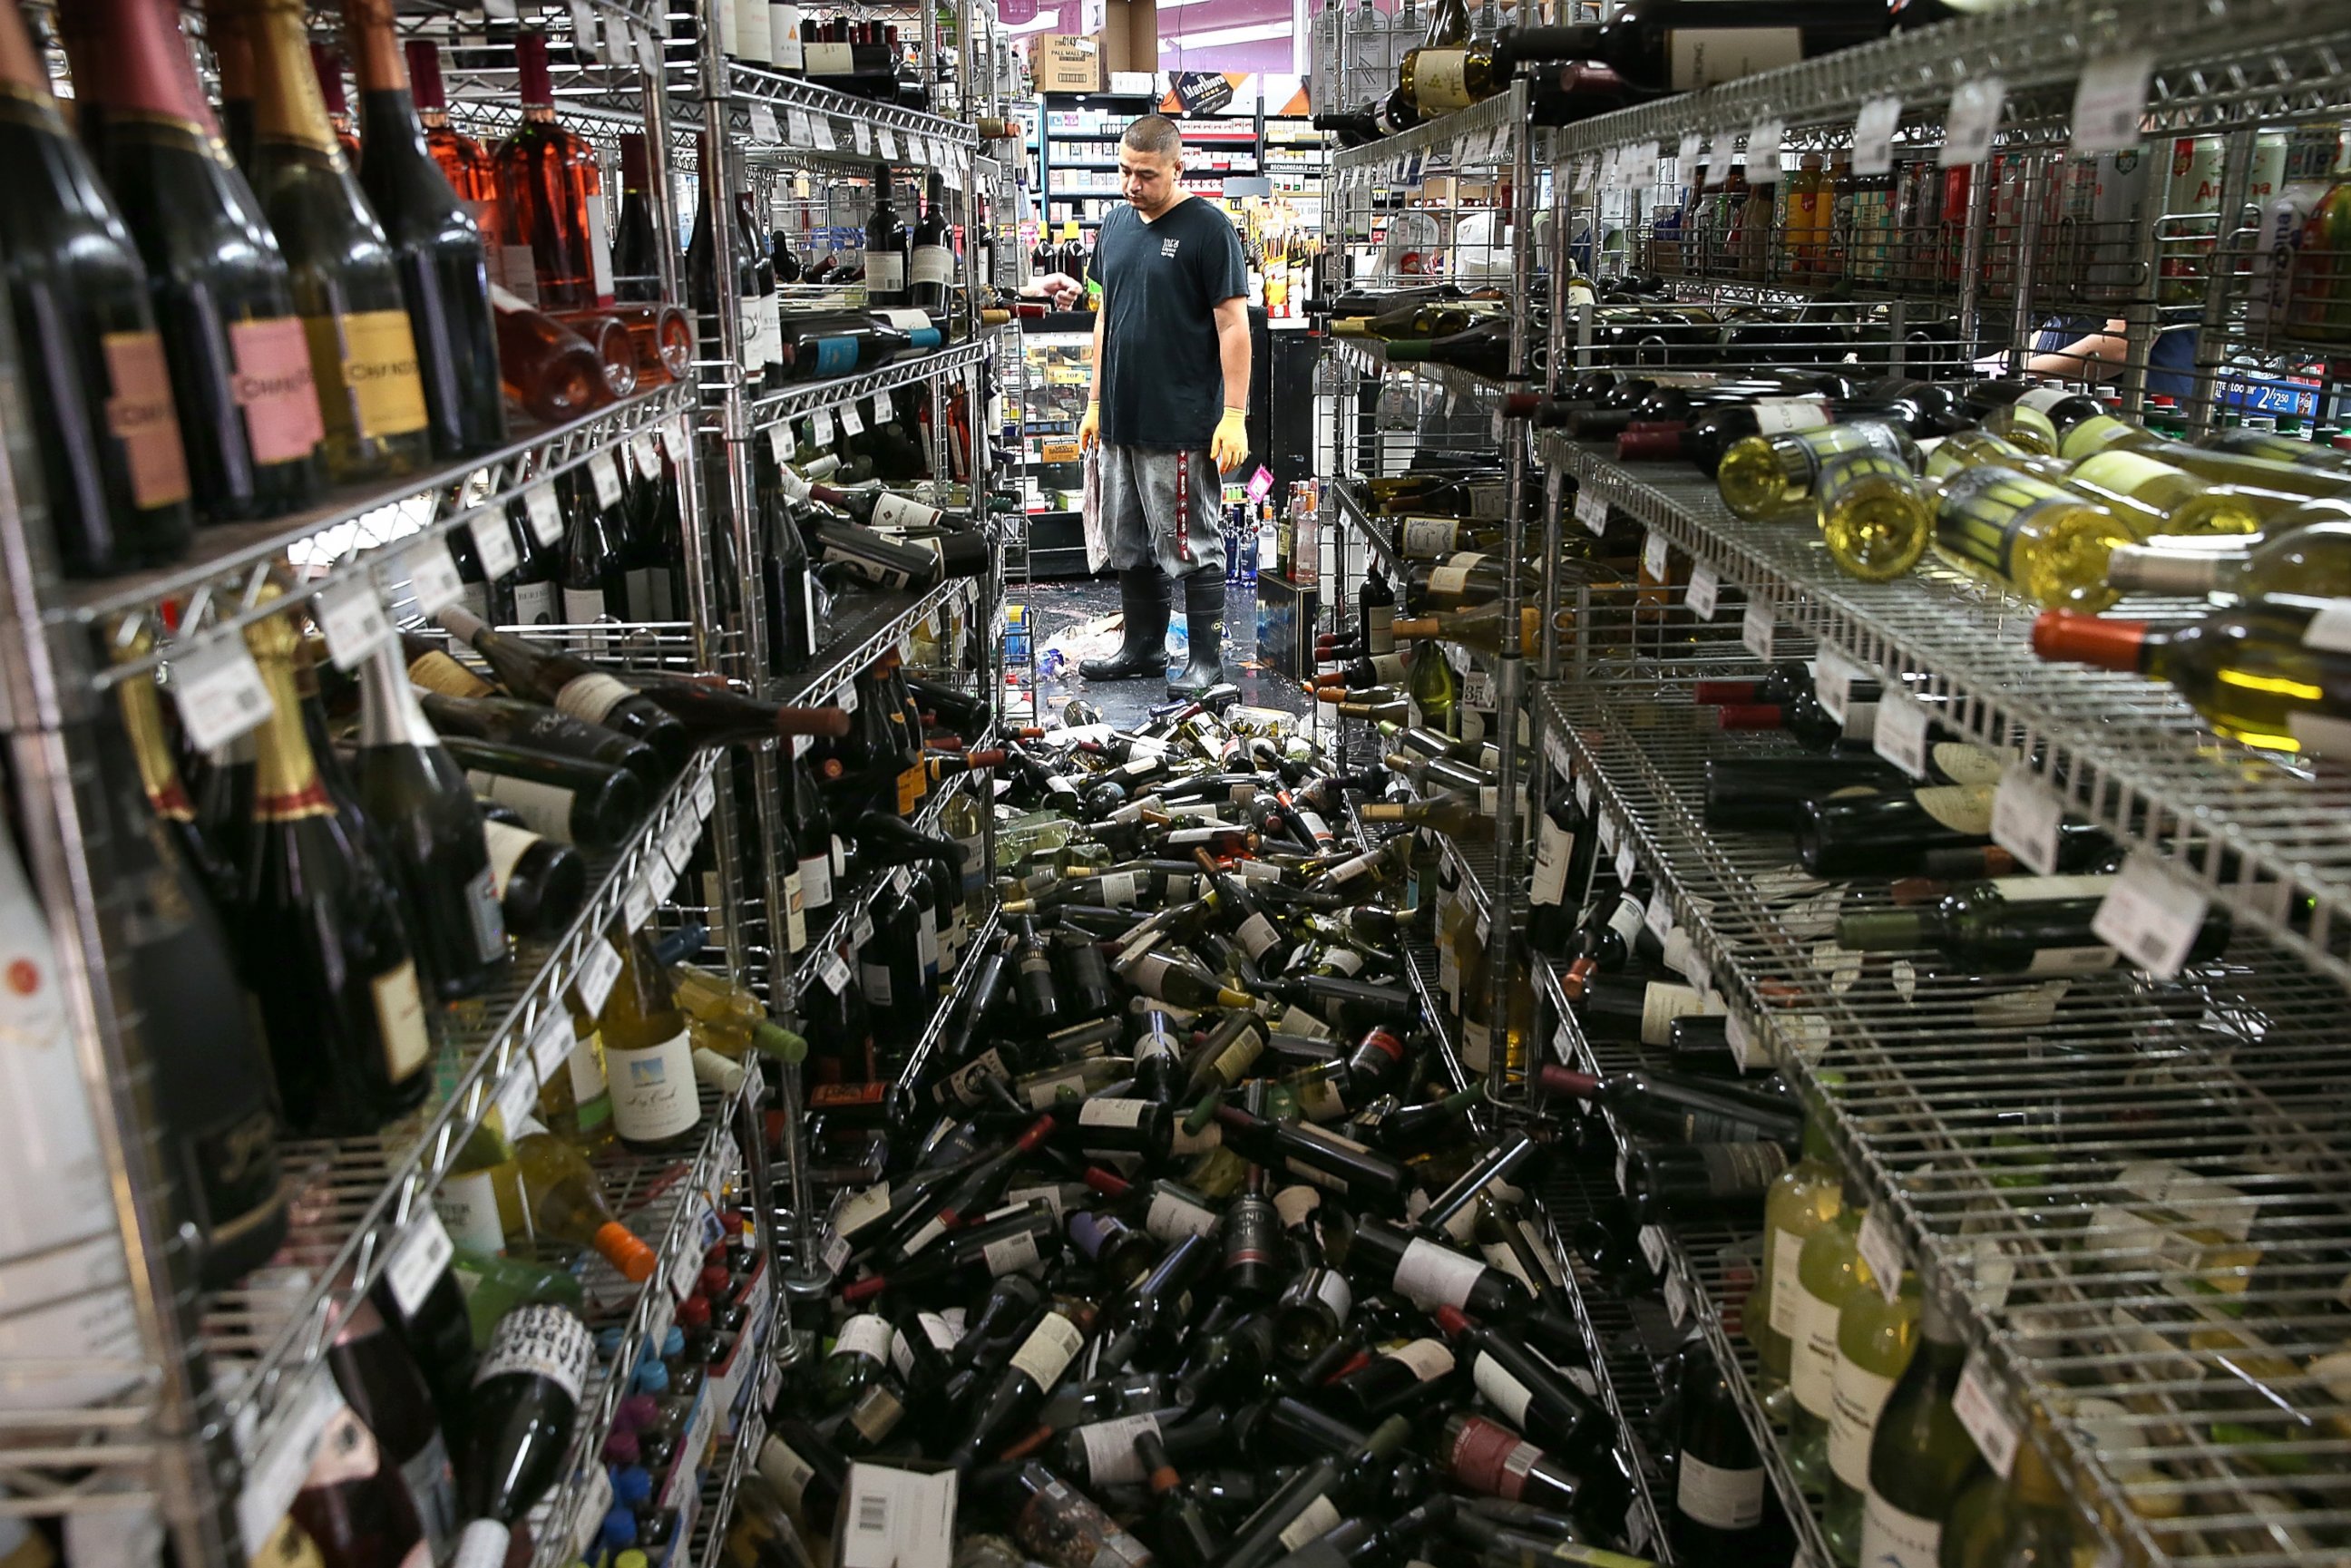 PHOTO: A worker looks at a pile of wine bottles that were thrown from the shelves at Van's Liquors following a reported 6.0 earthquake on Aug. 24, 2014 in Napa, Calif. 